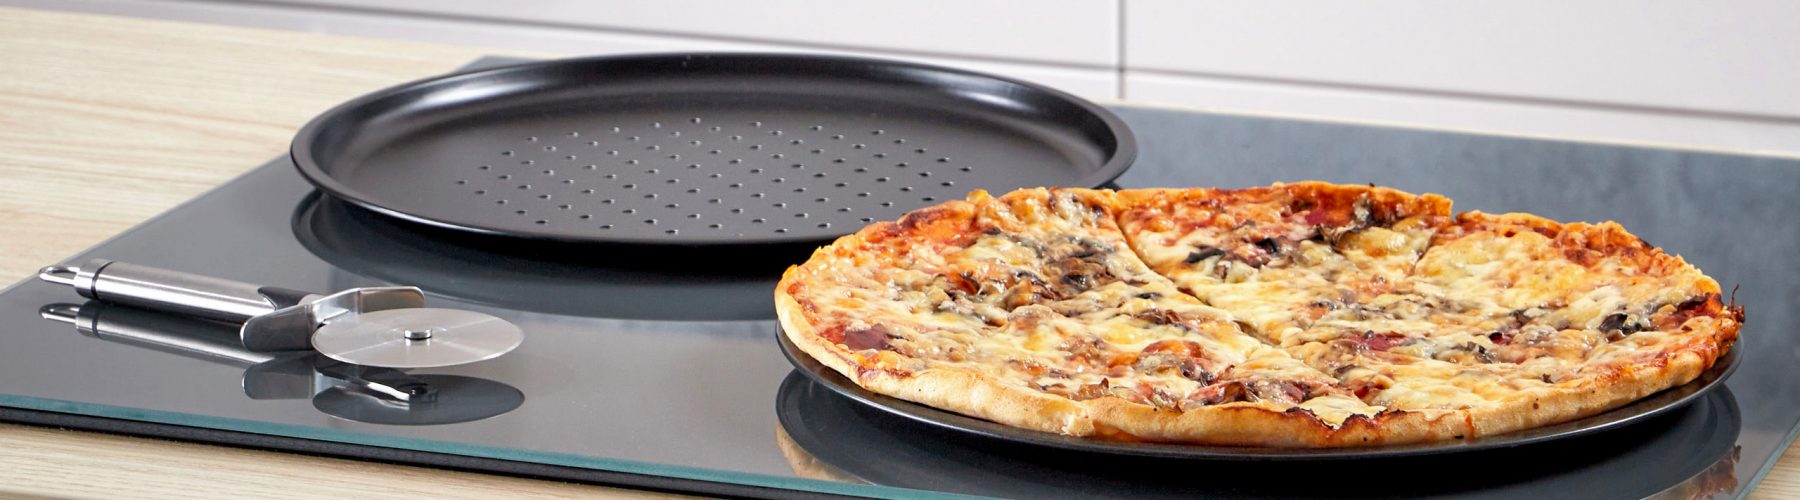 BRN8836765_Grizzly-pizza-pan-perforated-30-cm-set-of-2-black_05_21_00268_header